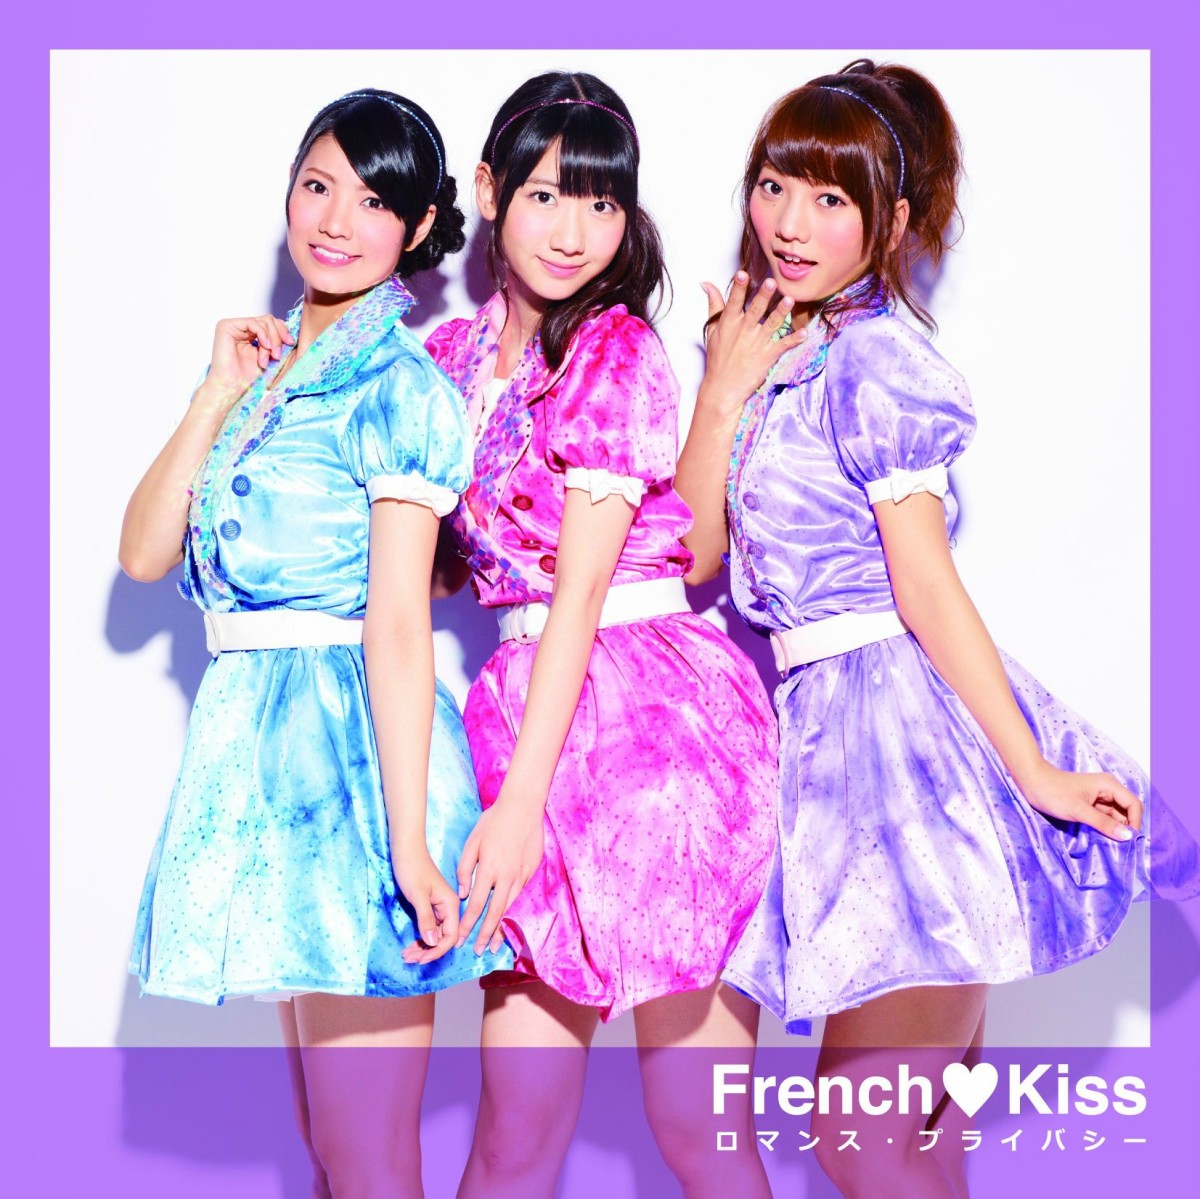 the-japanese-pop-music-group-french-kiss-featuring-former-akb48-idol-aki-takajo